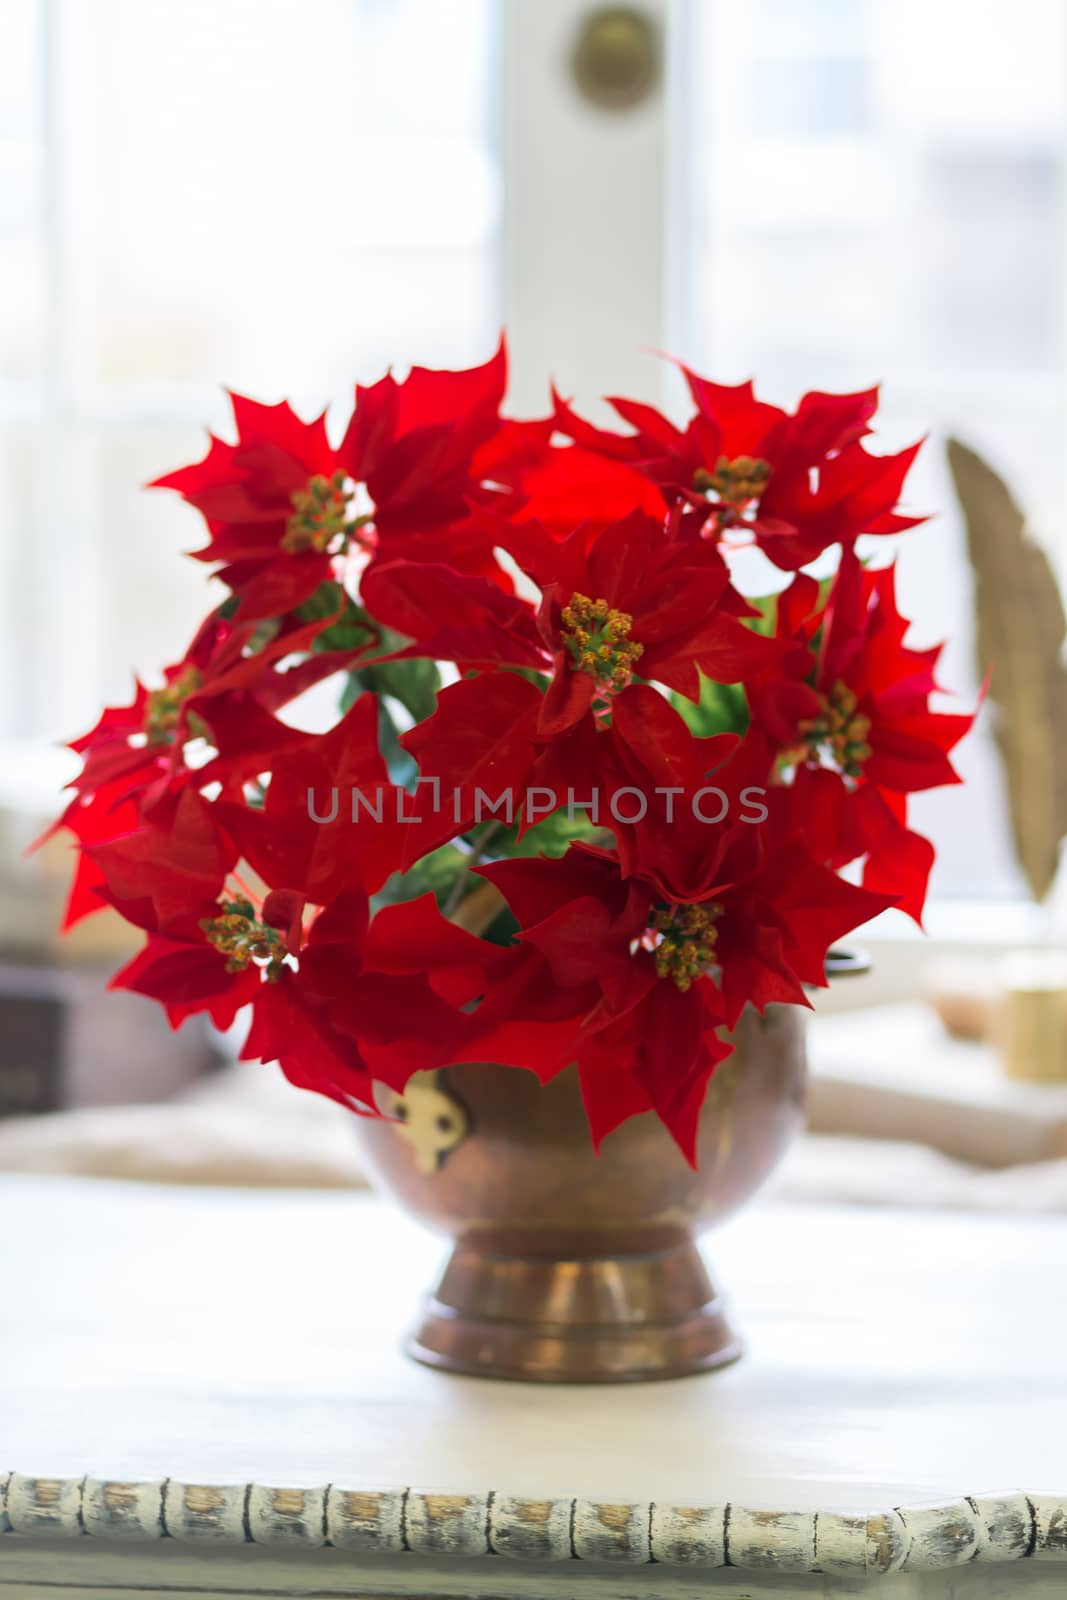 Vase with red poinsettia flowers on the window.